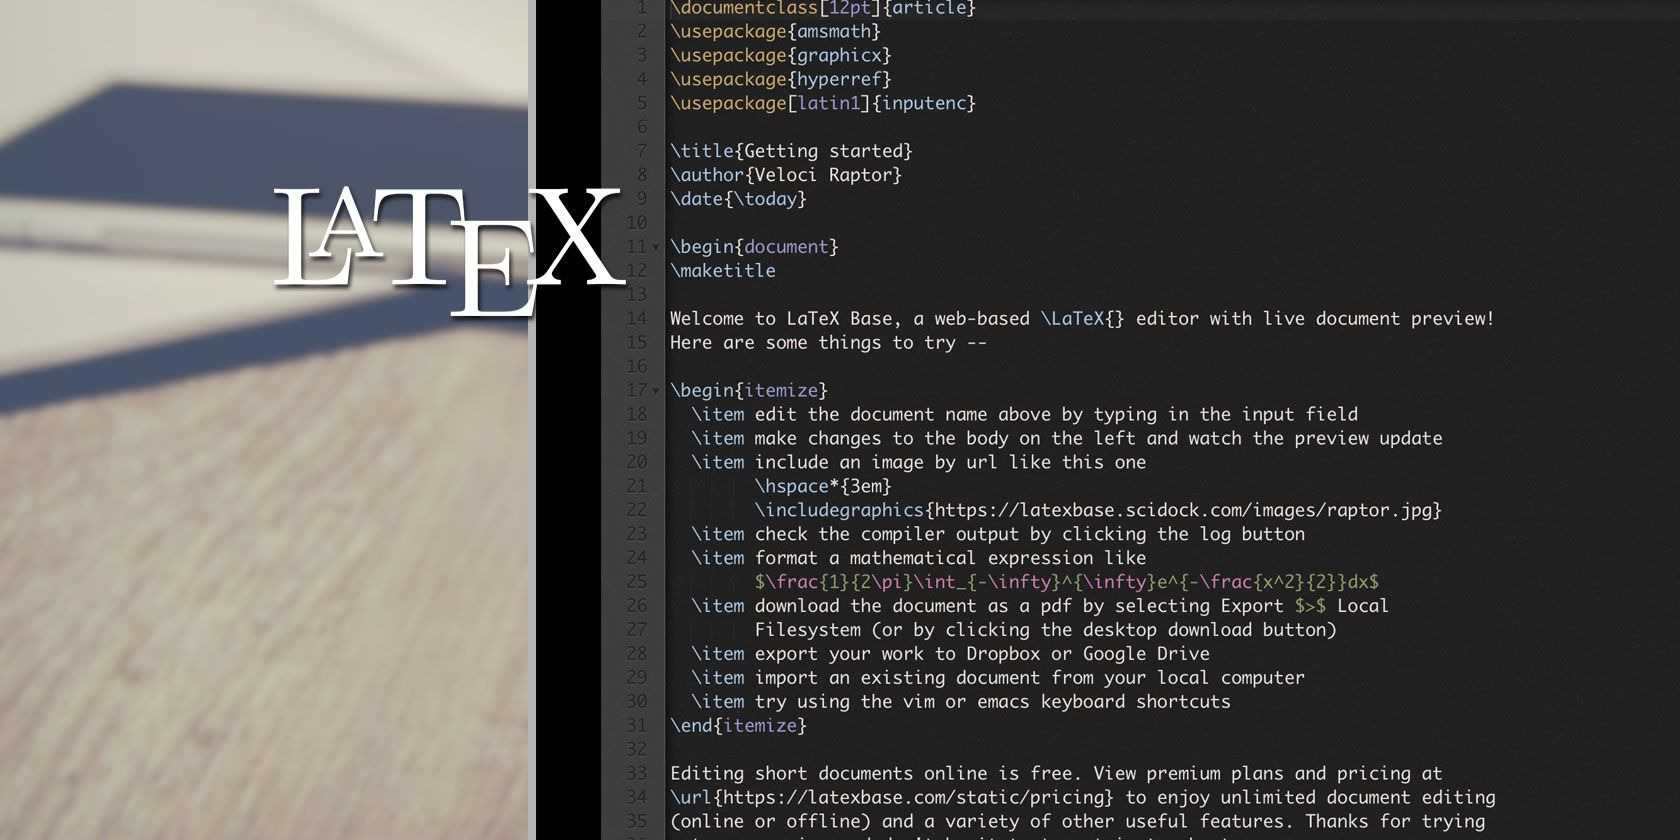 Article cls latex download for mac